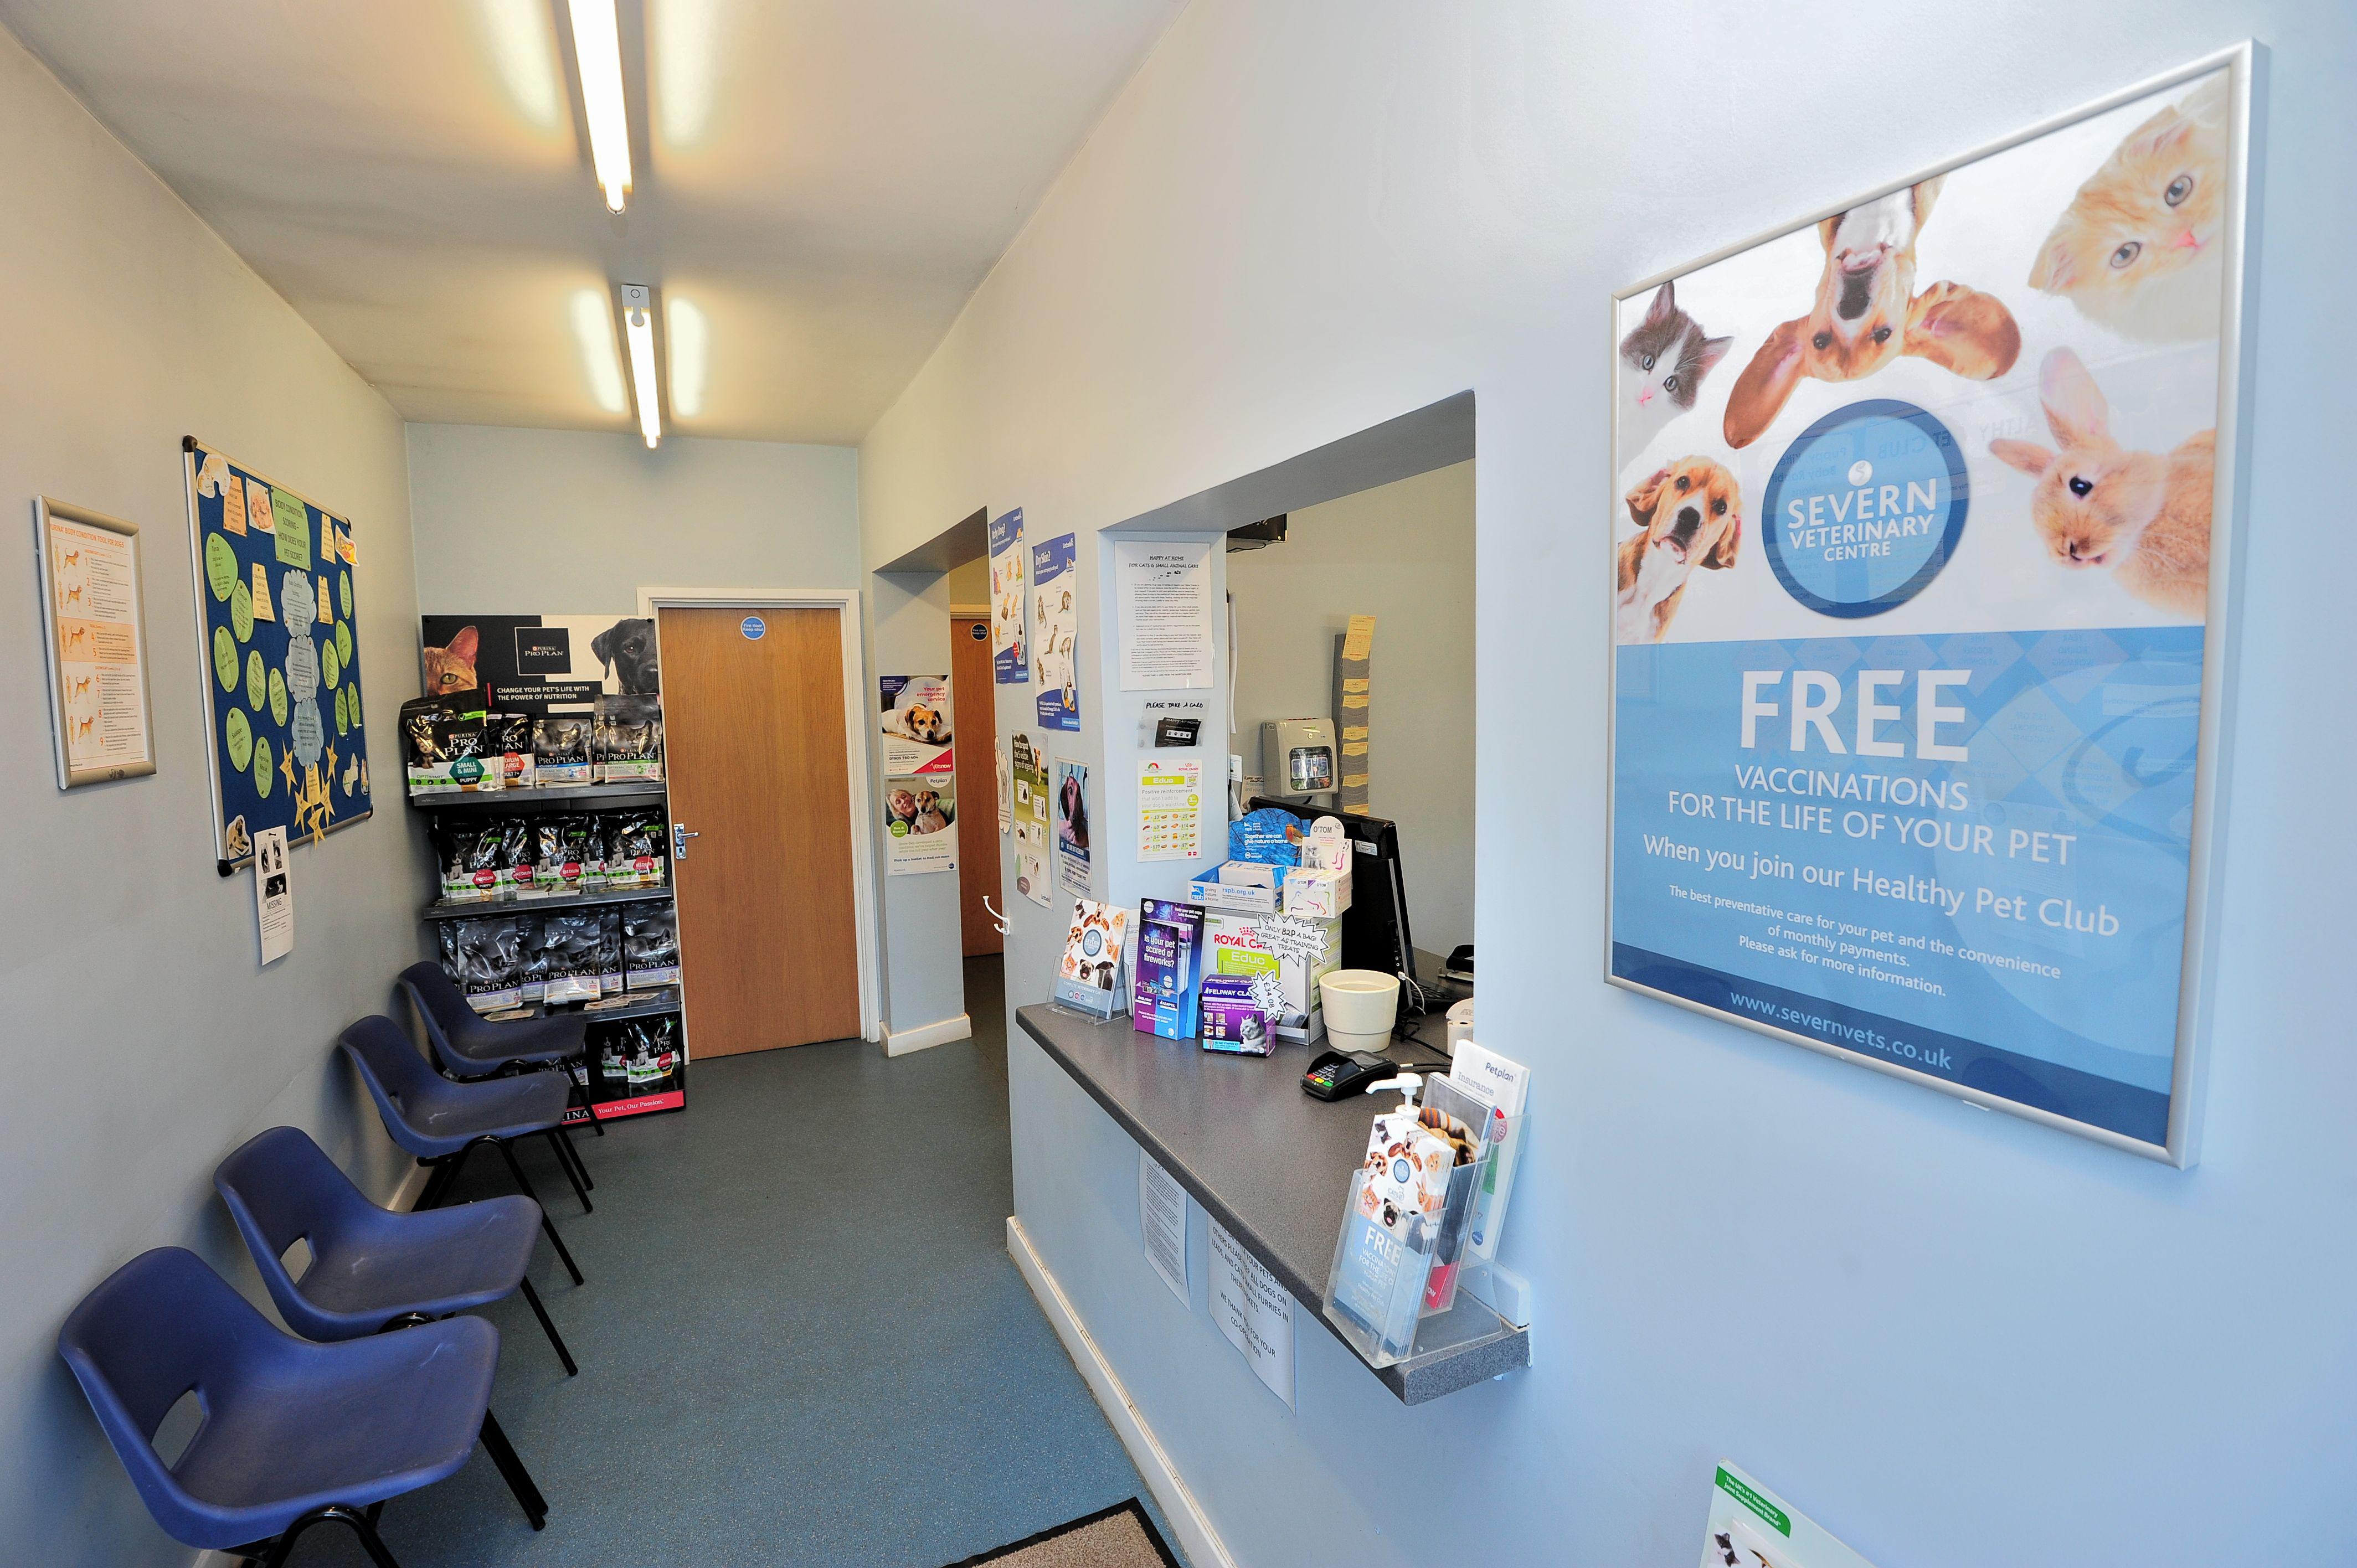 Images Severn Veterinary Centre, Alcester